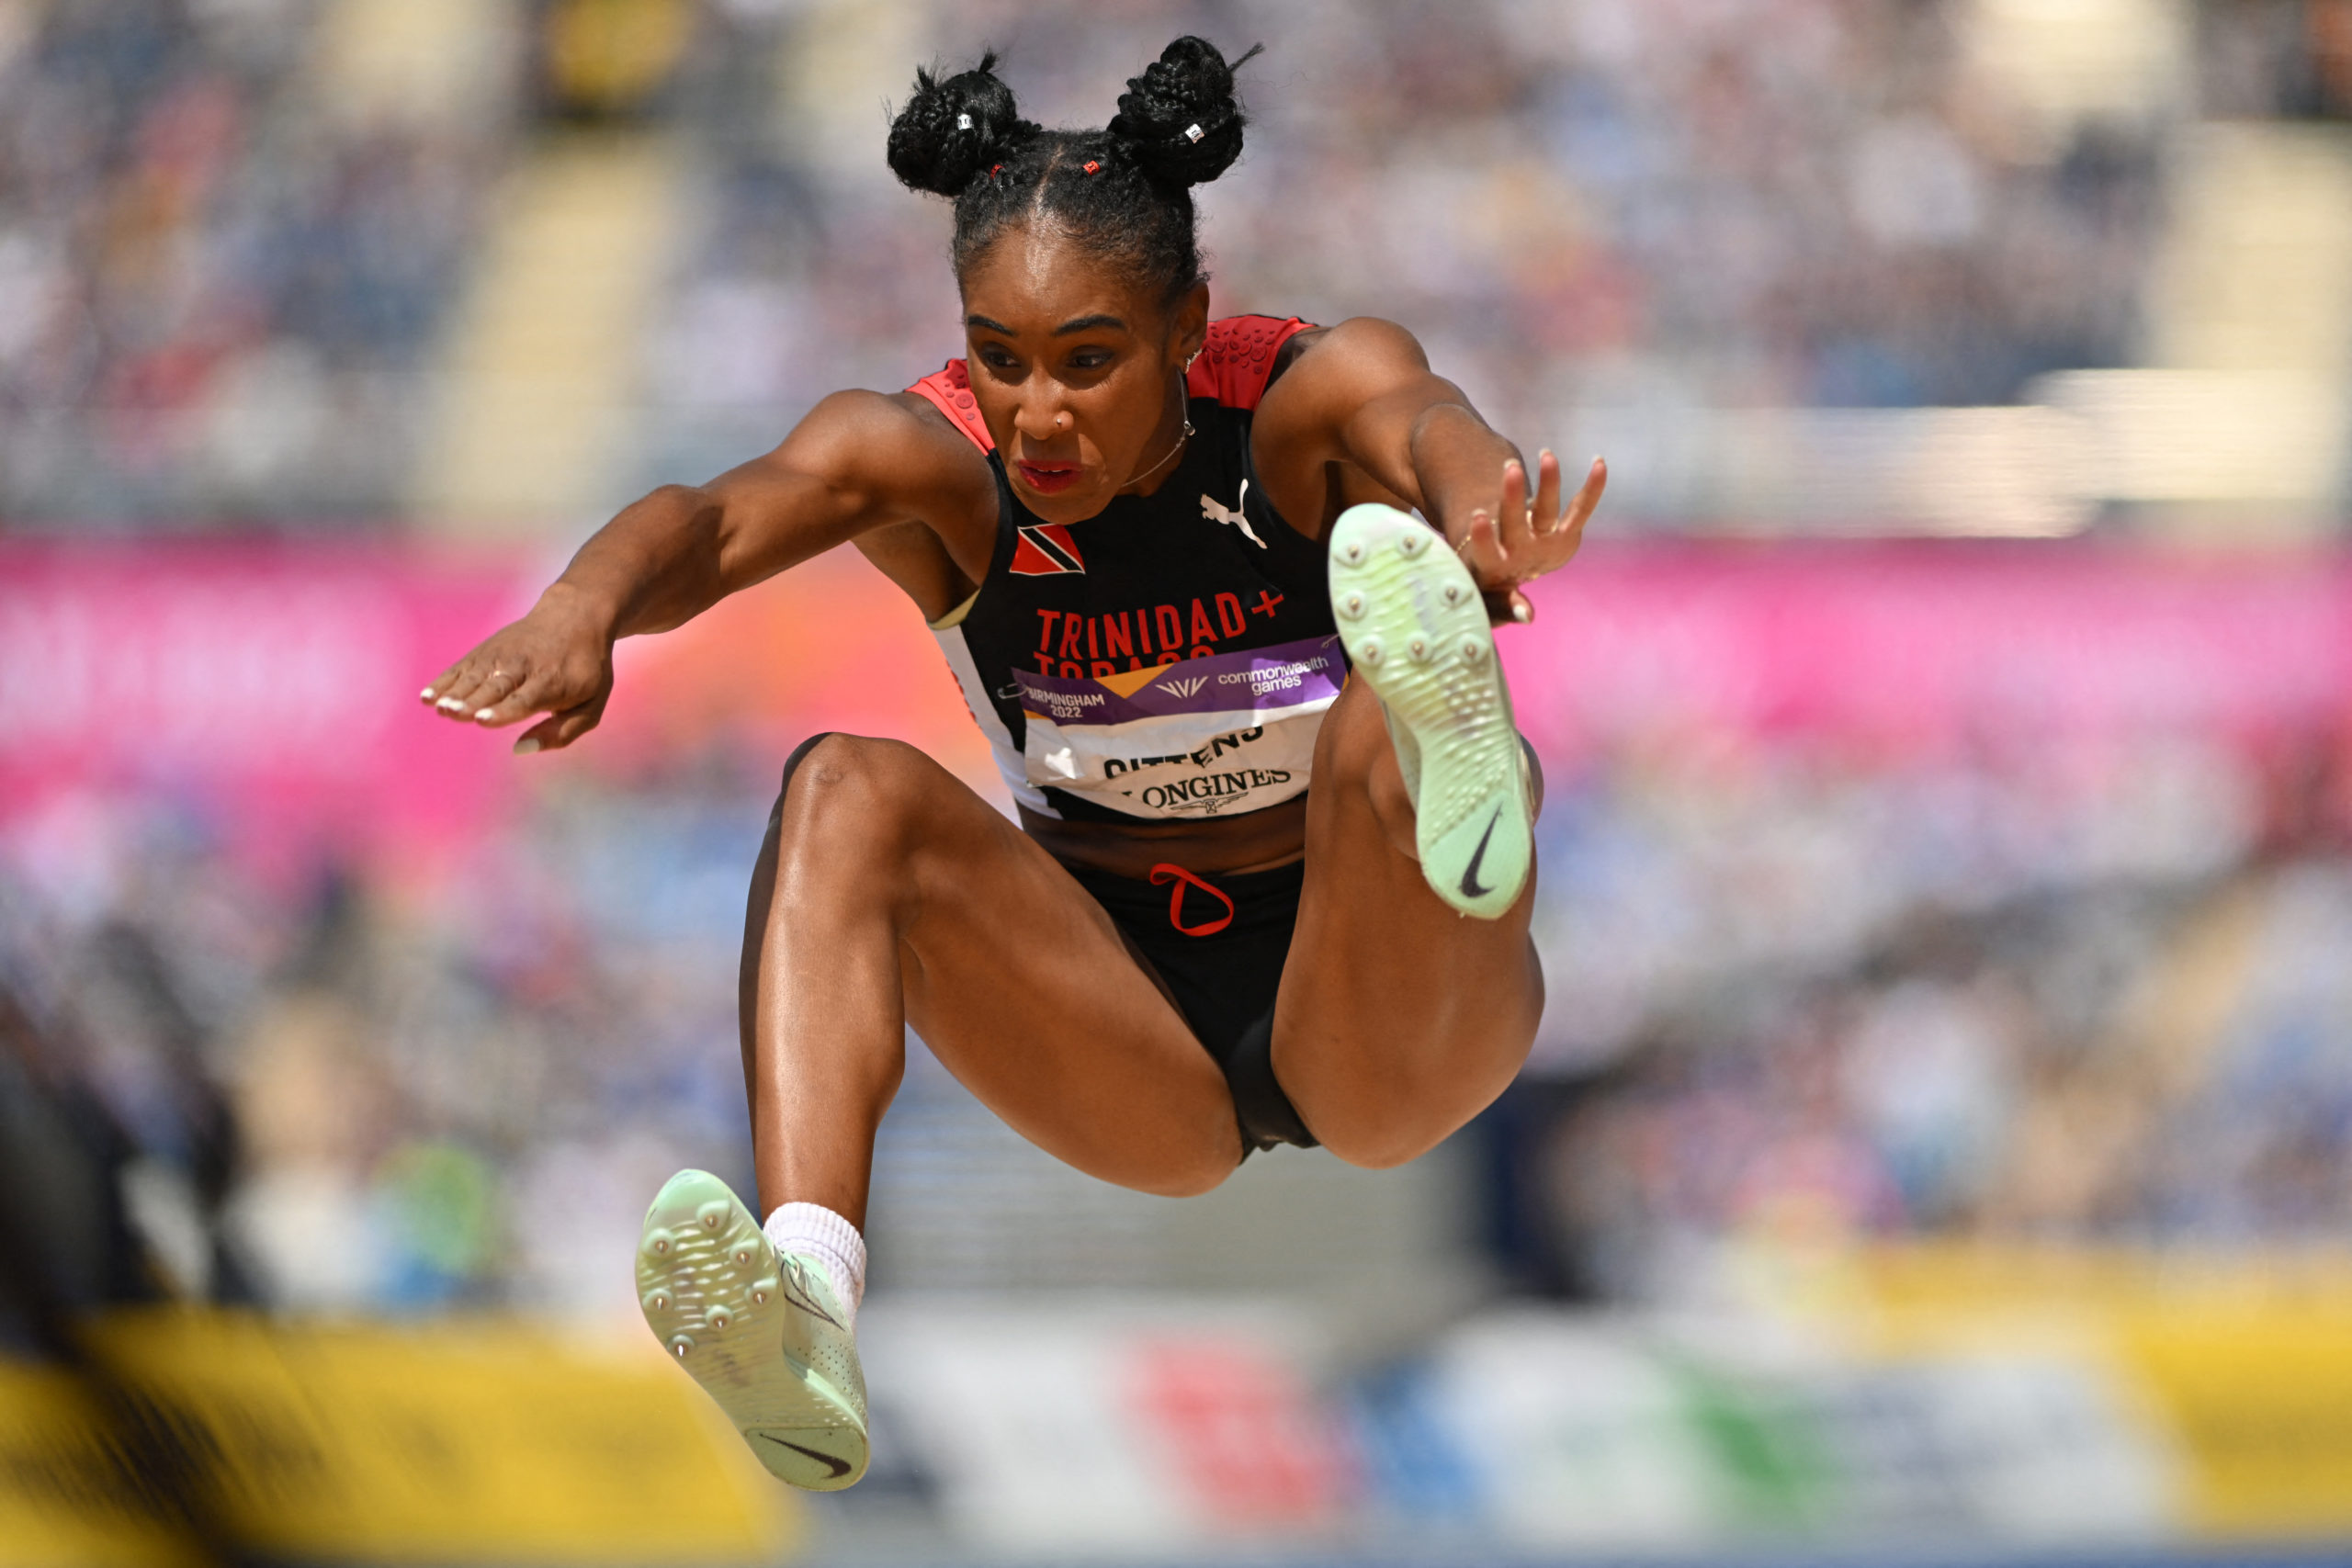 T&T’s Tyra Gittens secures first professional win at International Meet in France